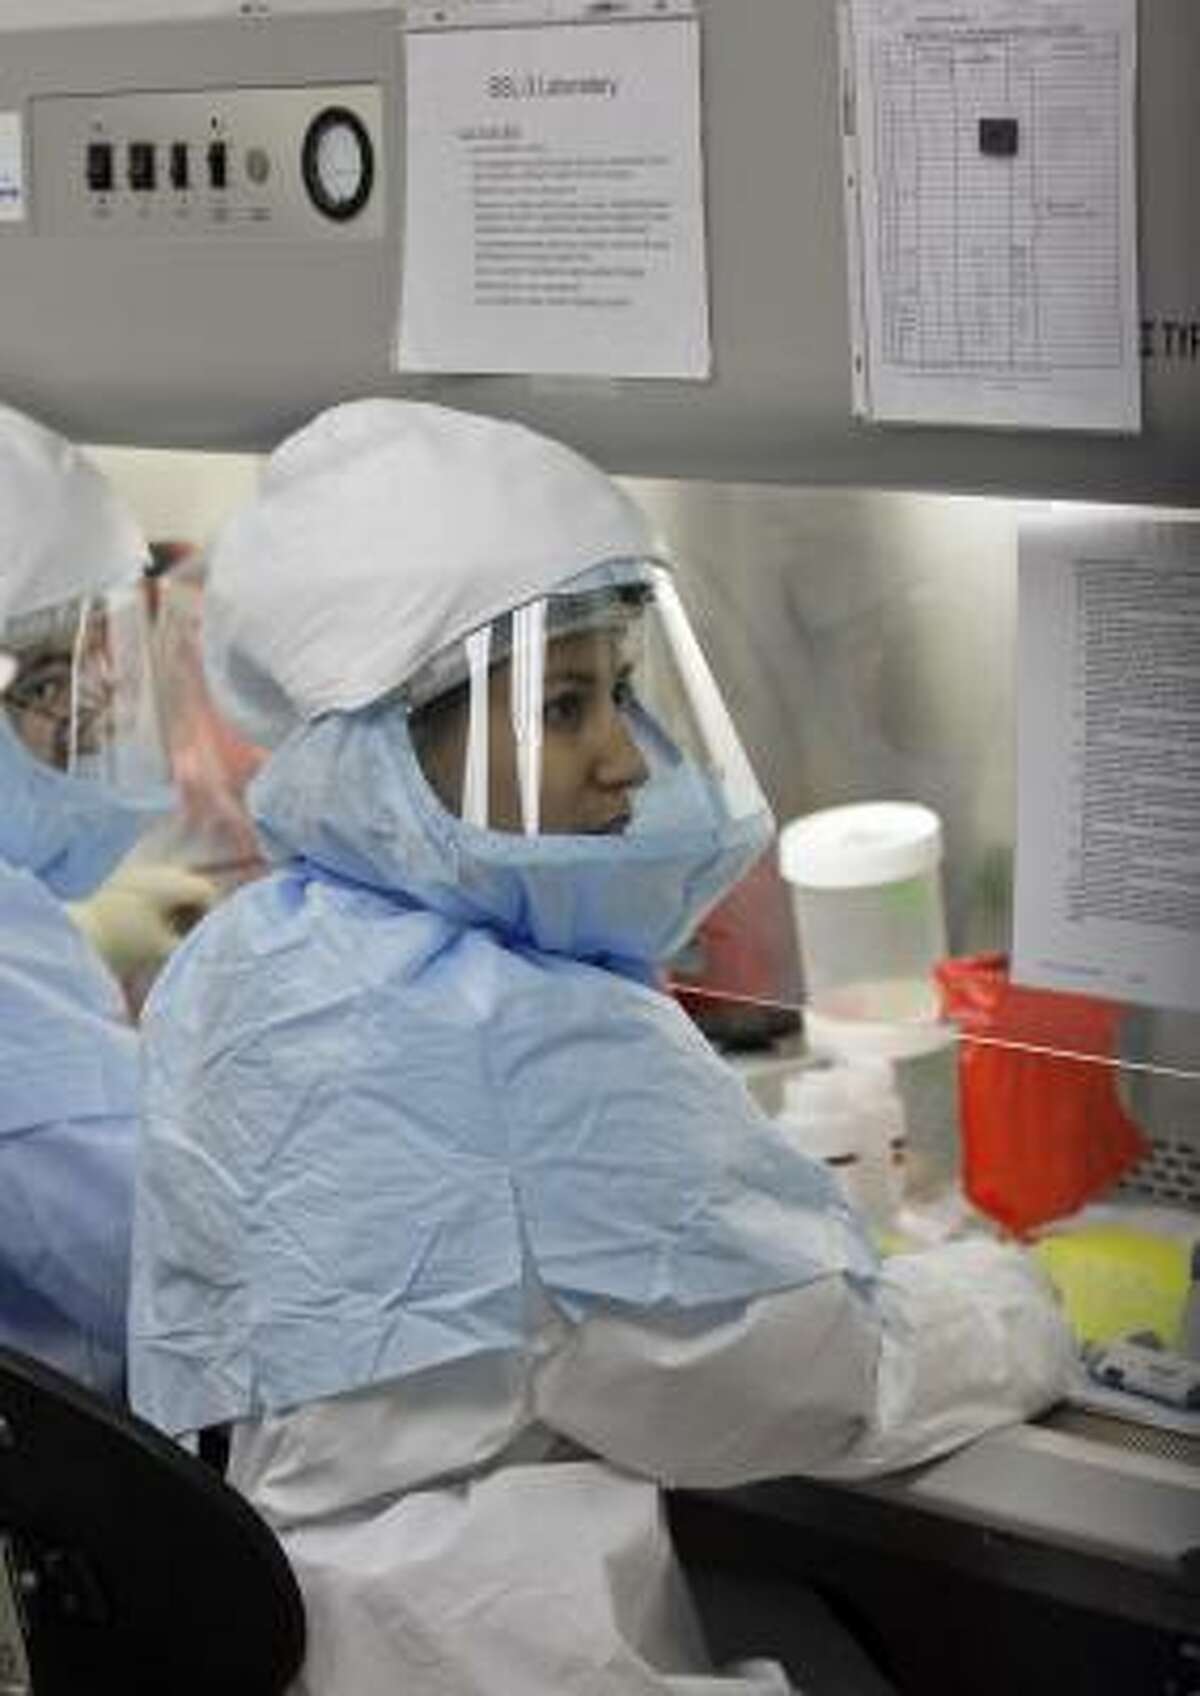 Lead scientist Lupe Garbalena, right, and microbiologist Gilbert Ortiz handle samples while testing for swine flu at the Houston Department of Health and Human Services.